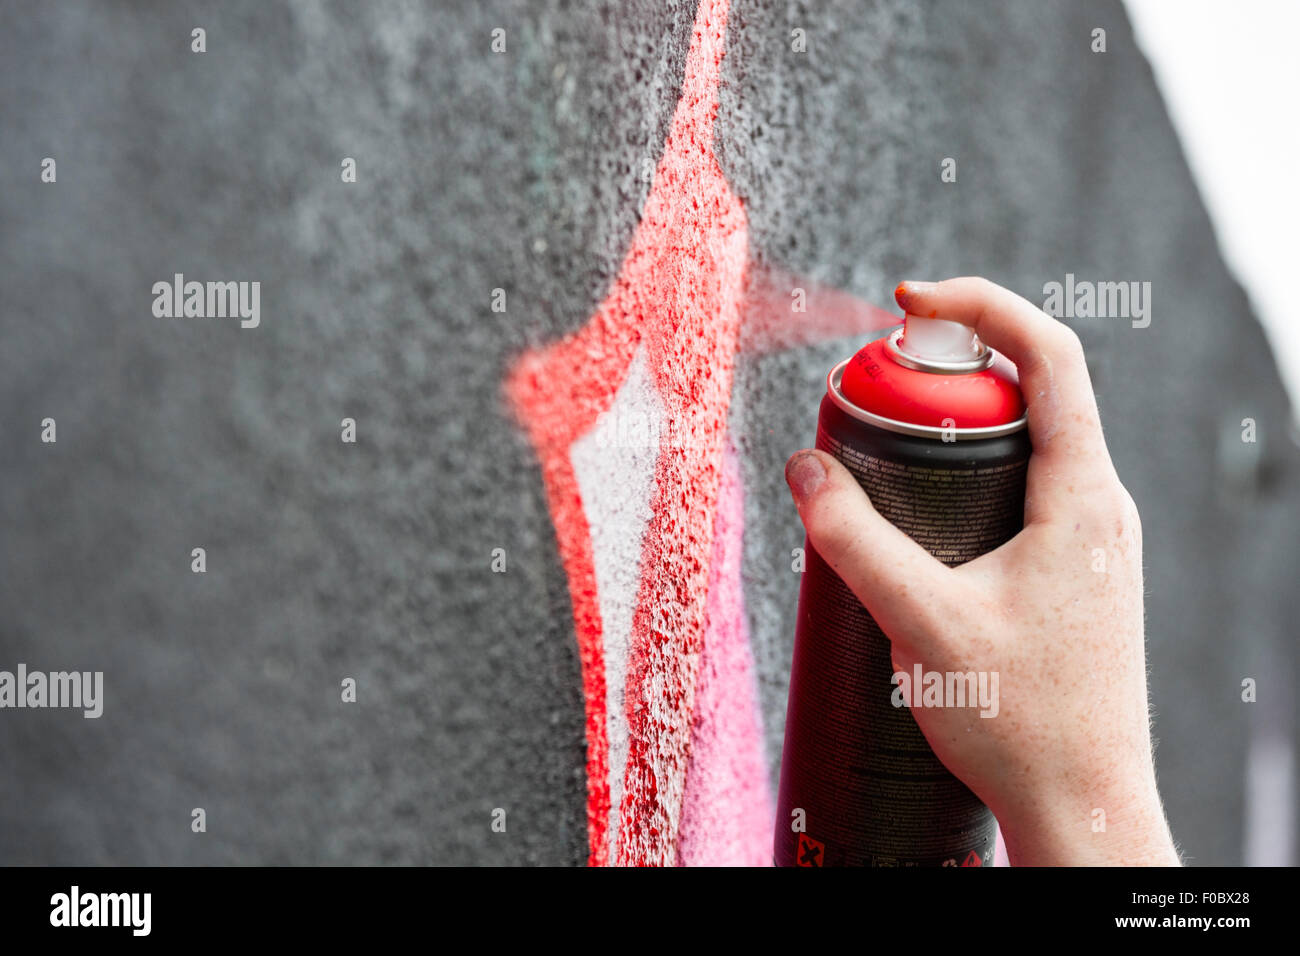 Graffity painter drawing a picture on the wall, detail Stock Photo